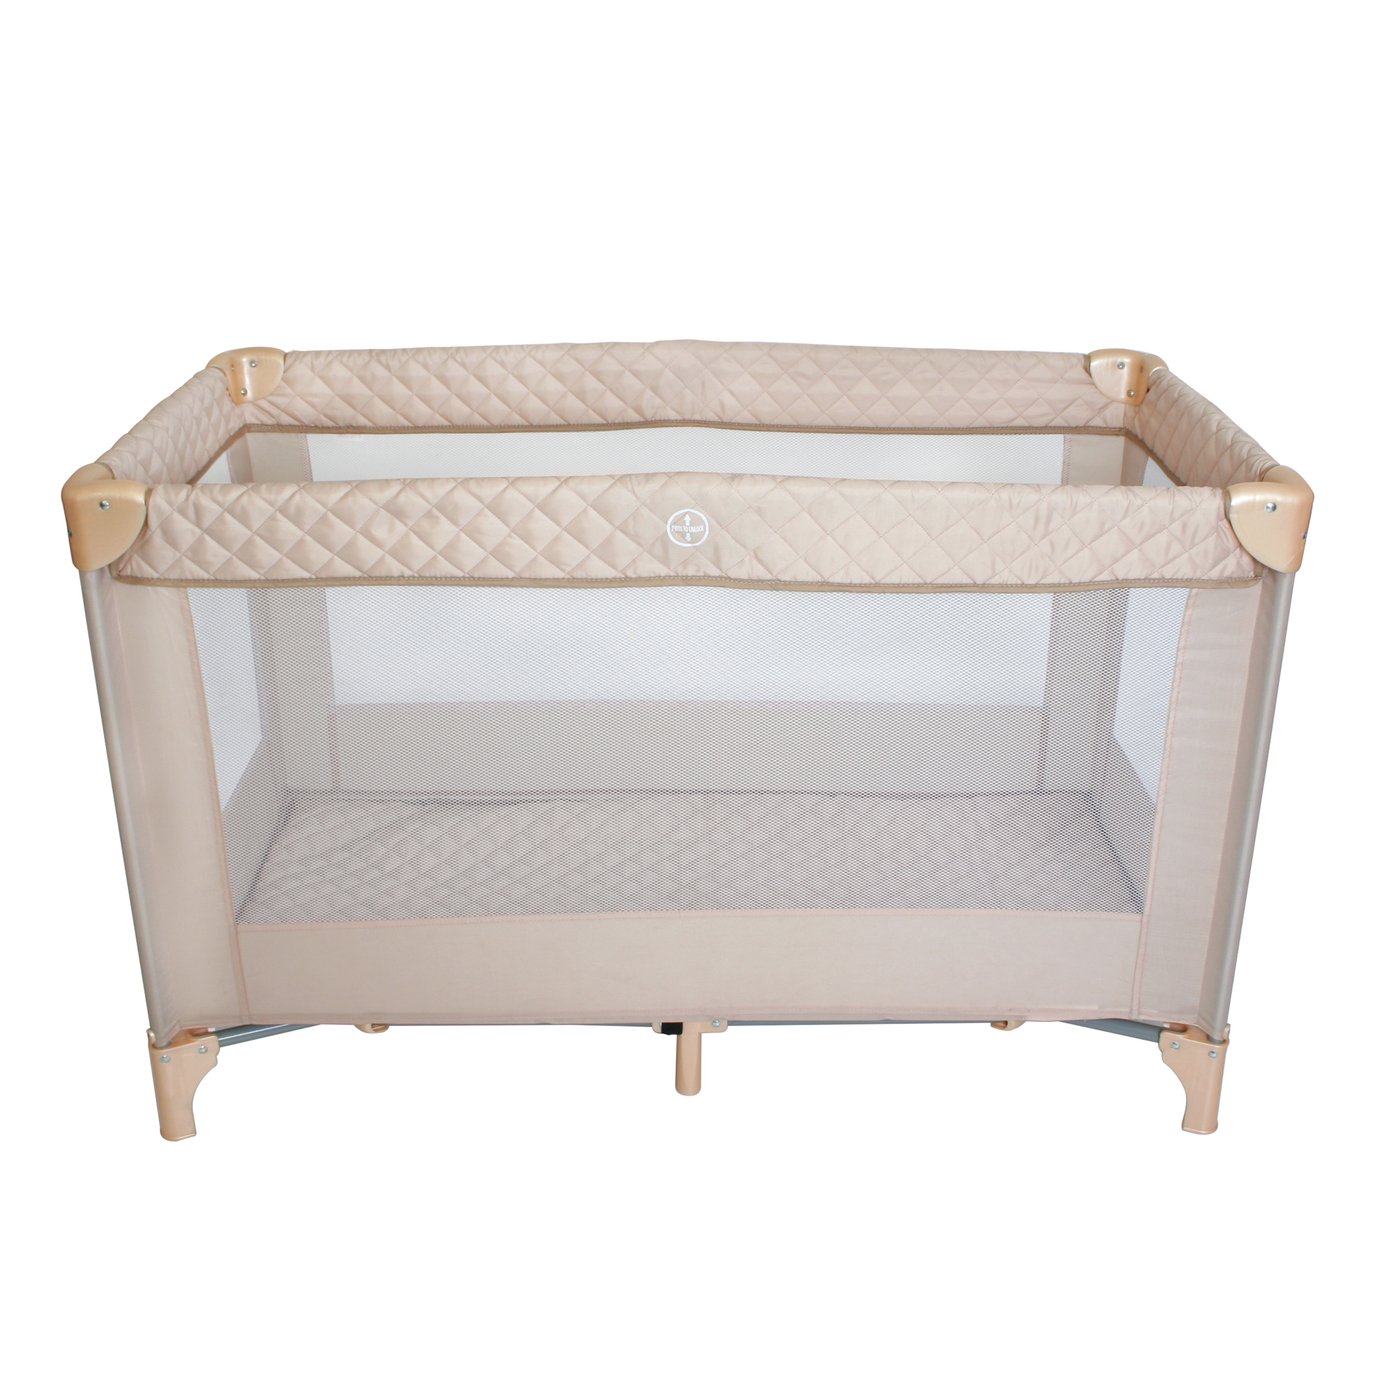 Pink travel cot